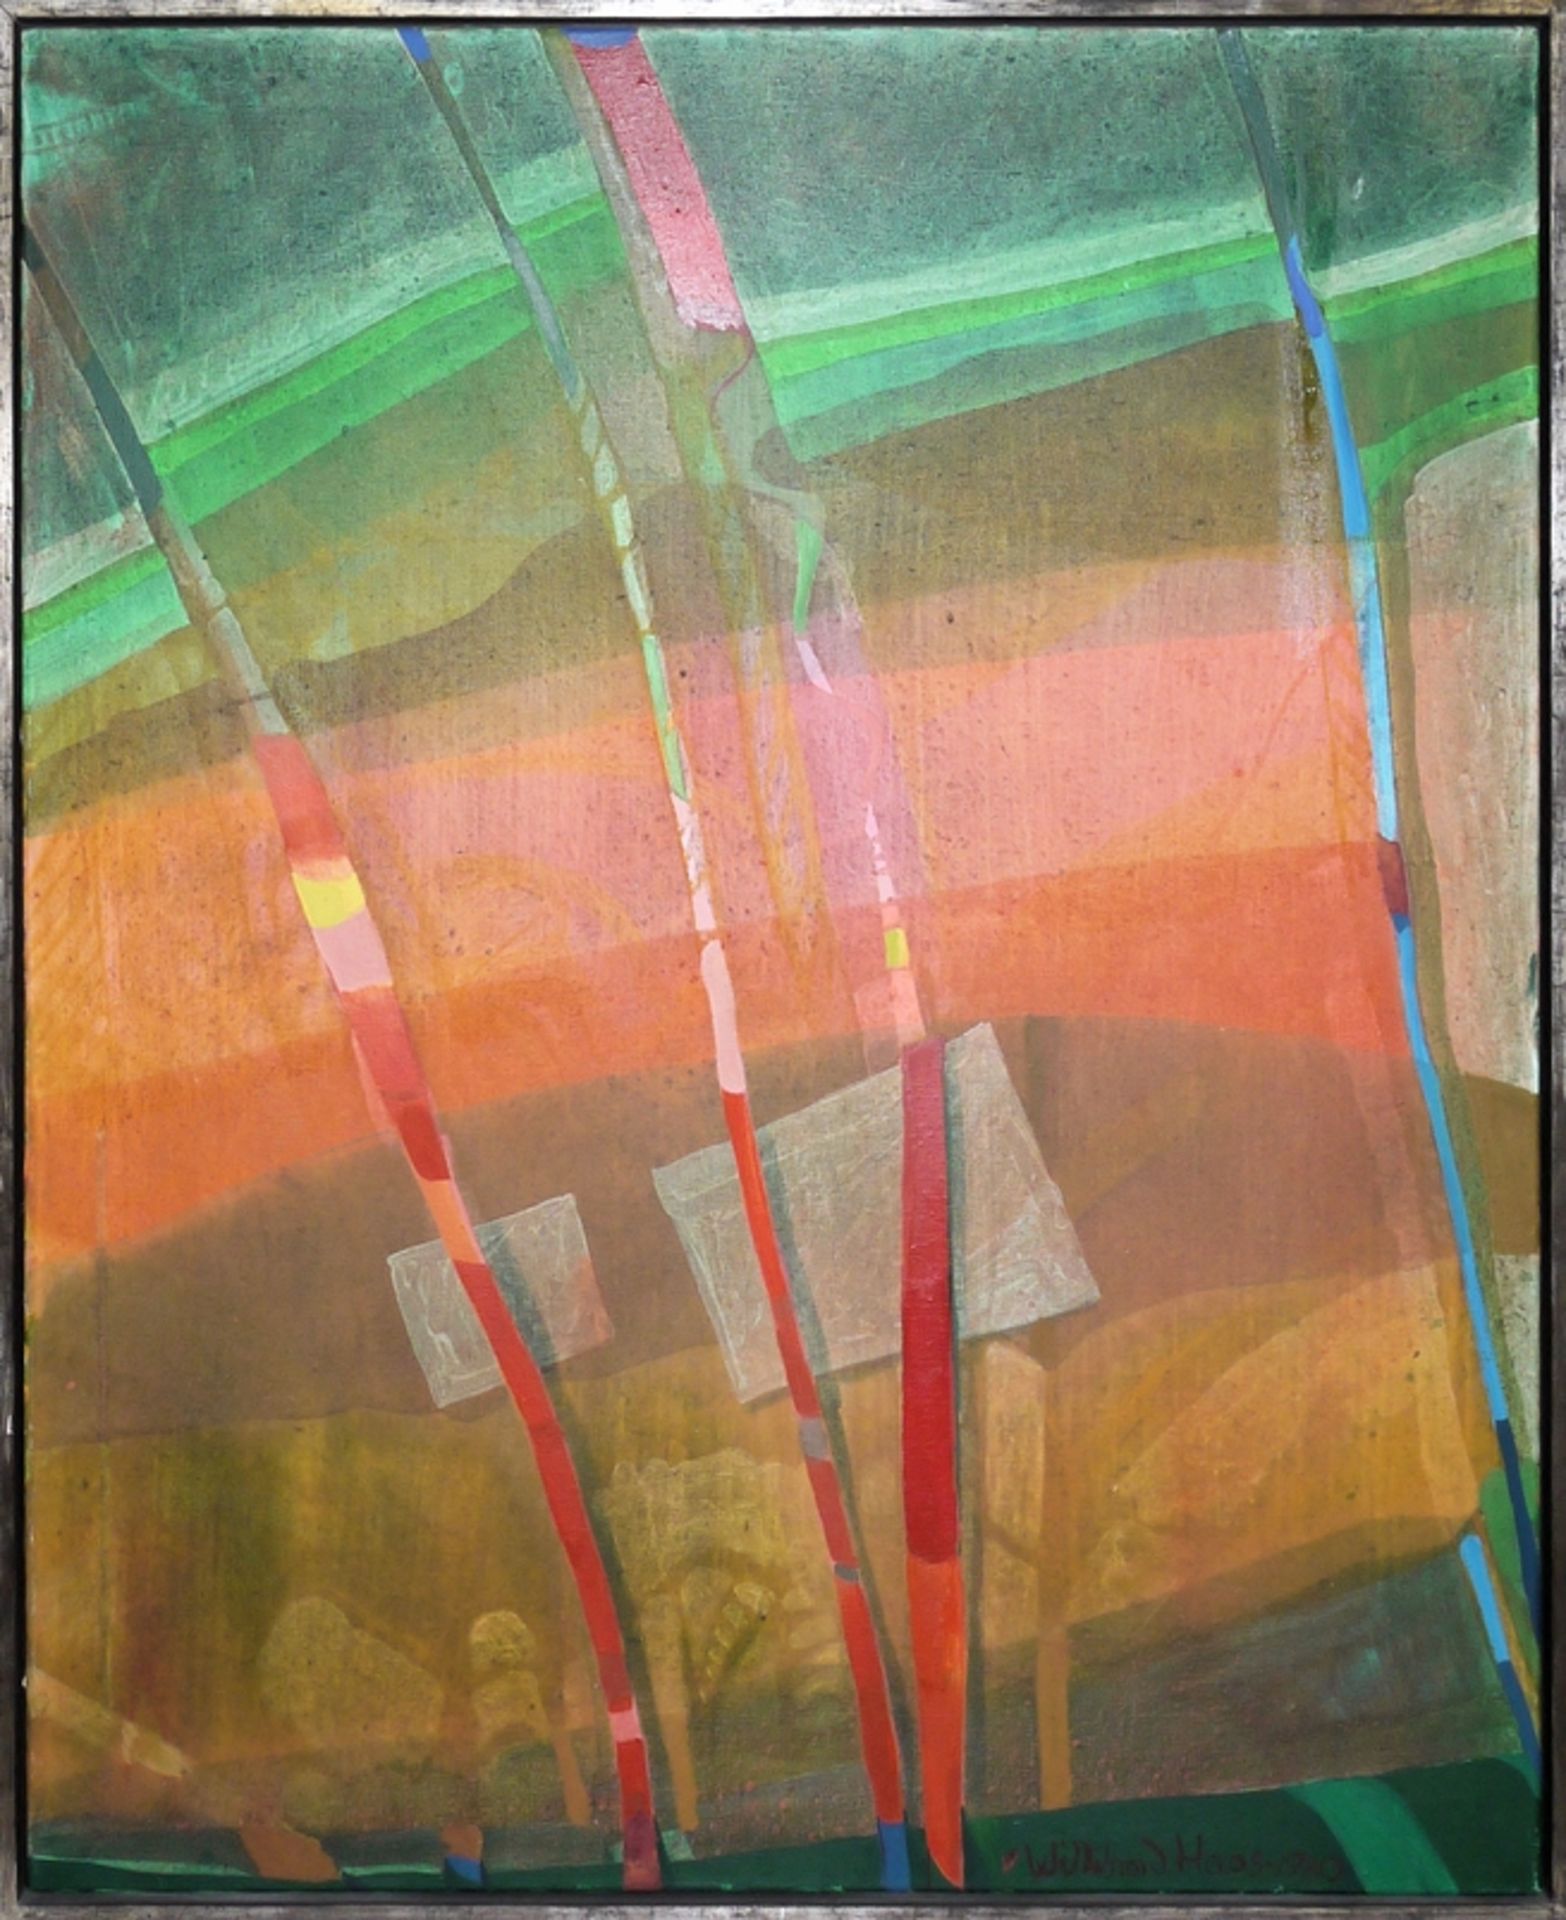 Willibrord Haas, Untitled, acrylic painting from 1980